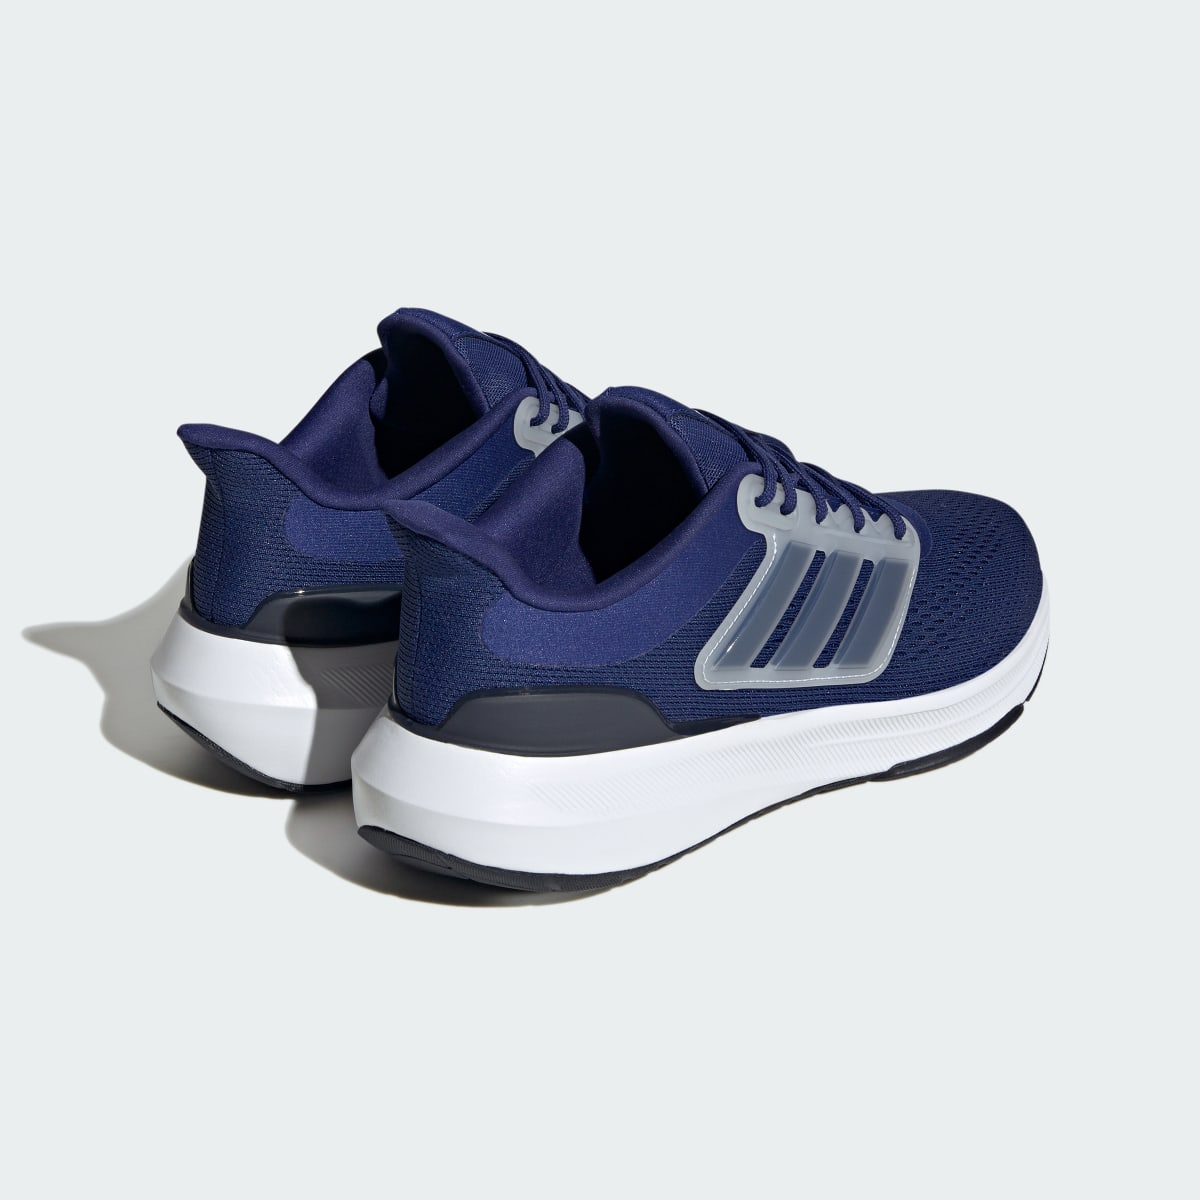 Adidas Ultrabounce Wide Shoes. 6